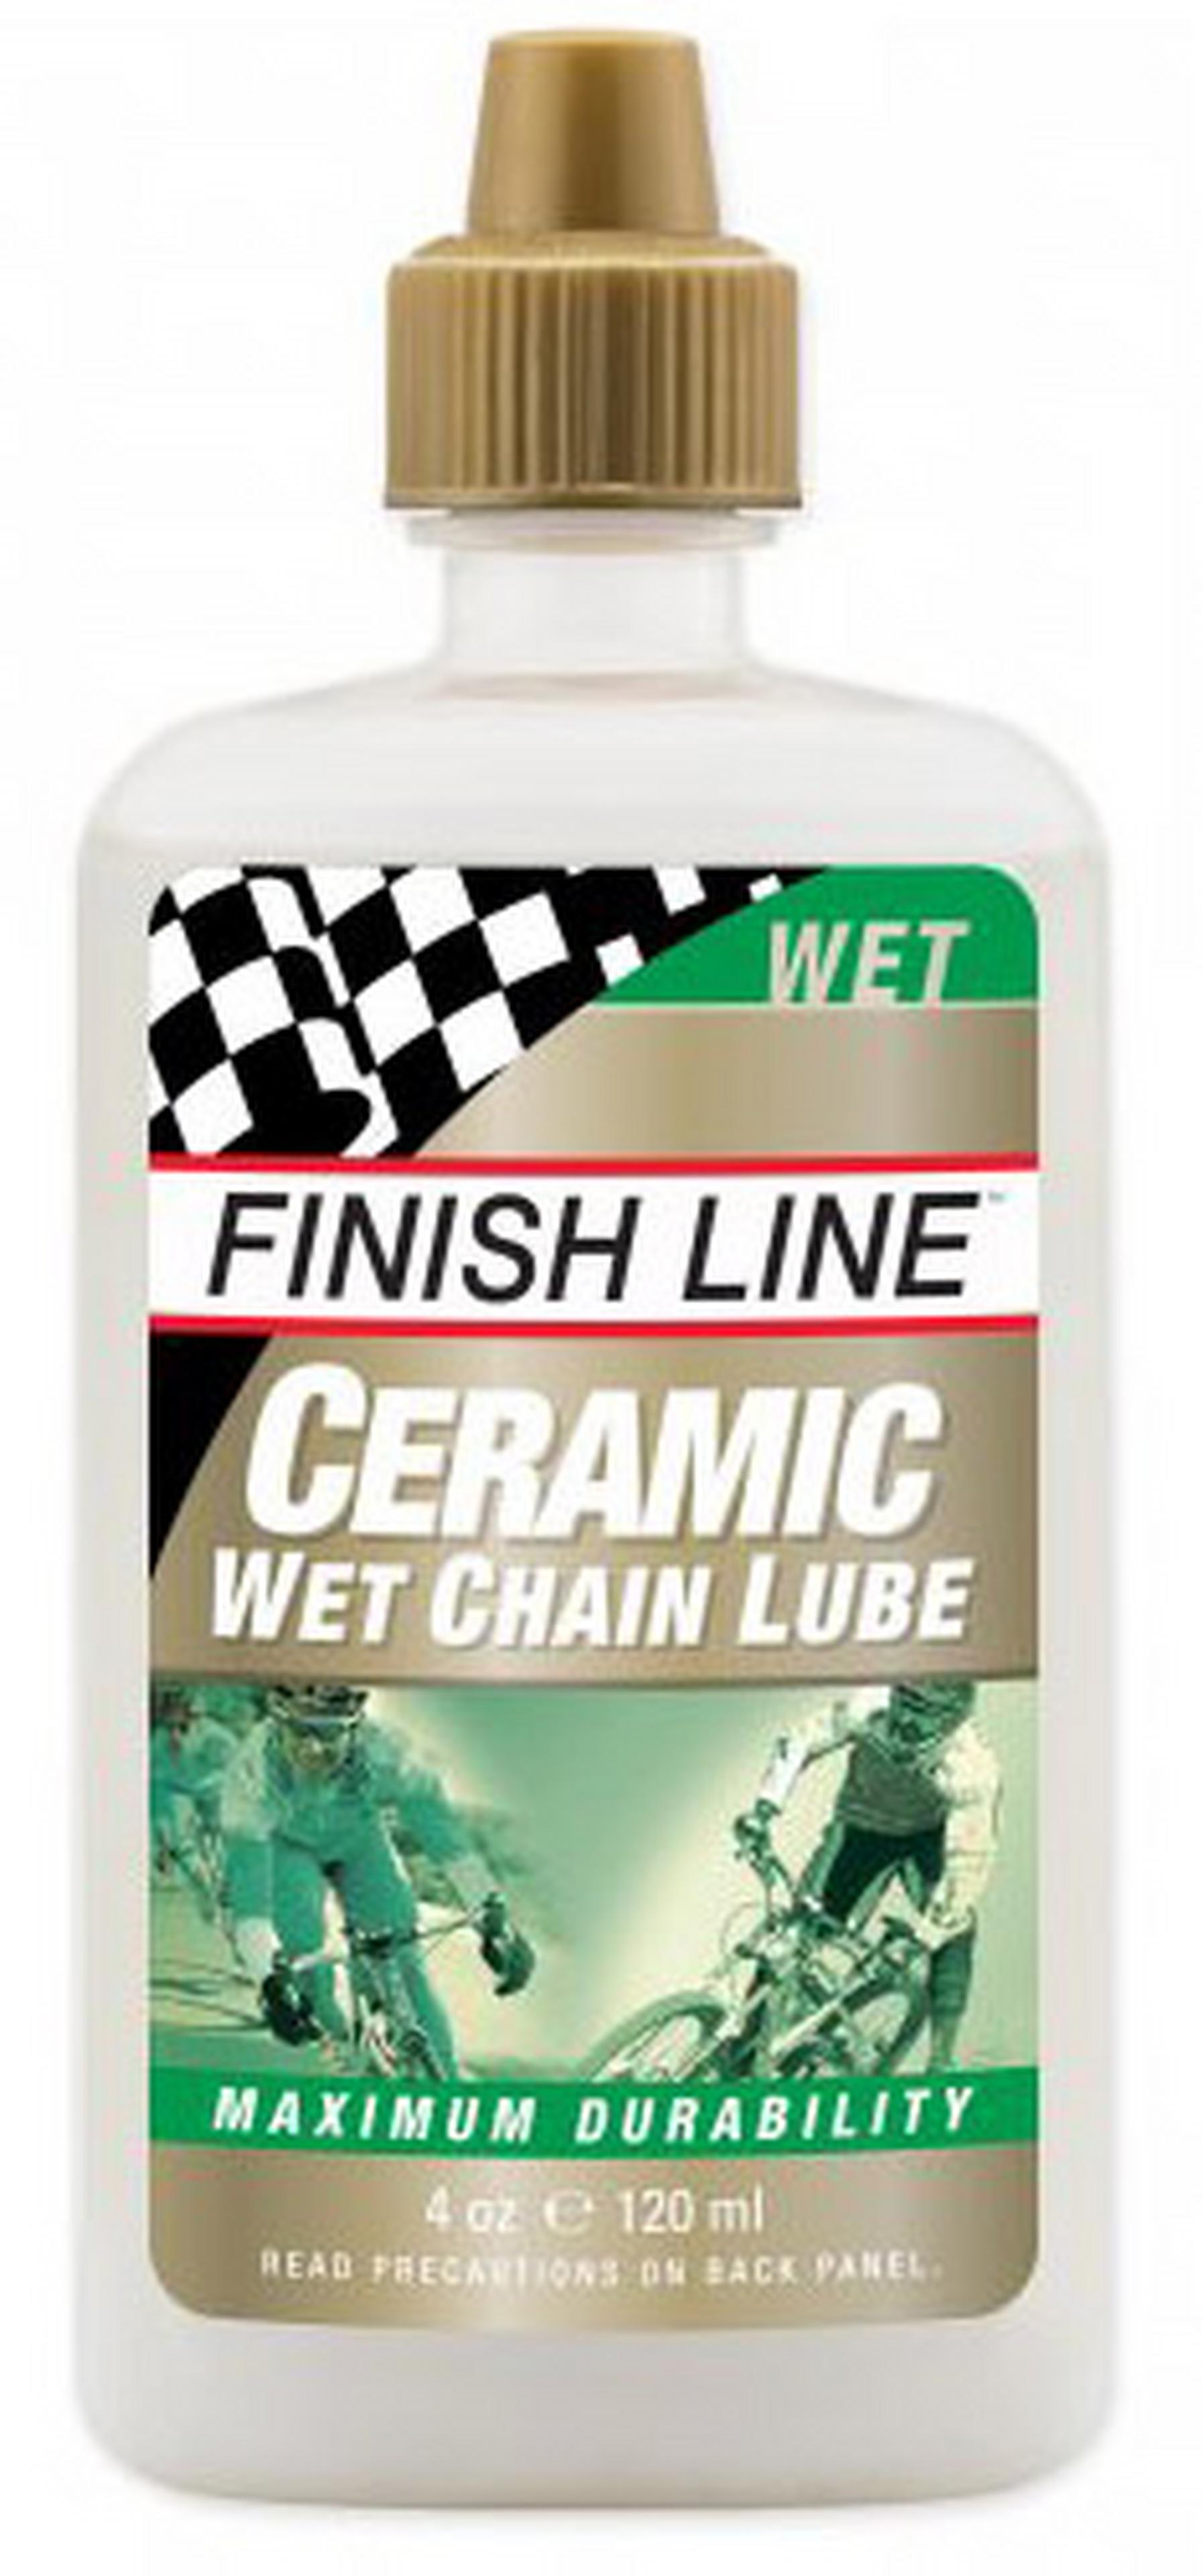 Finish Line - Bicycle Lubricants and Care ProductsCitrus Bike